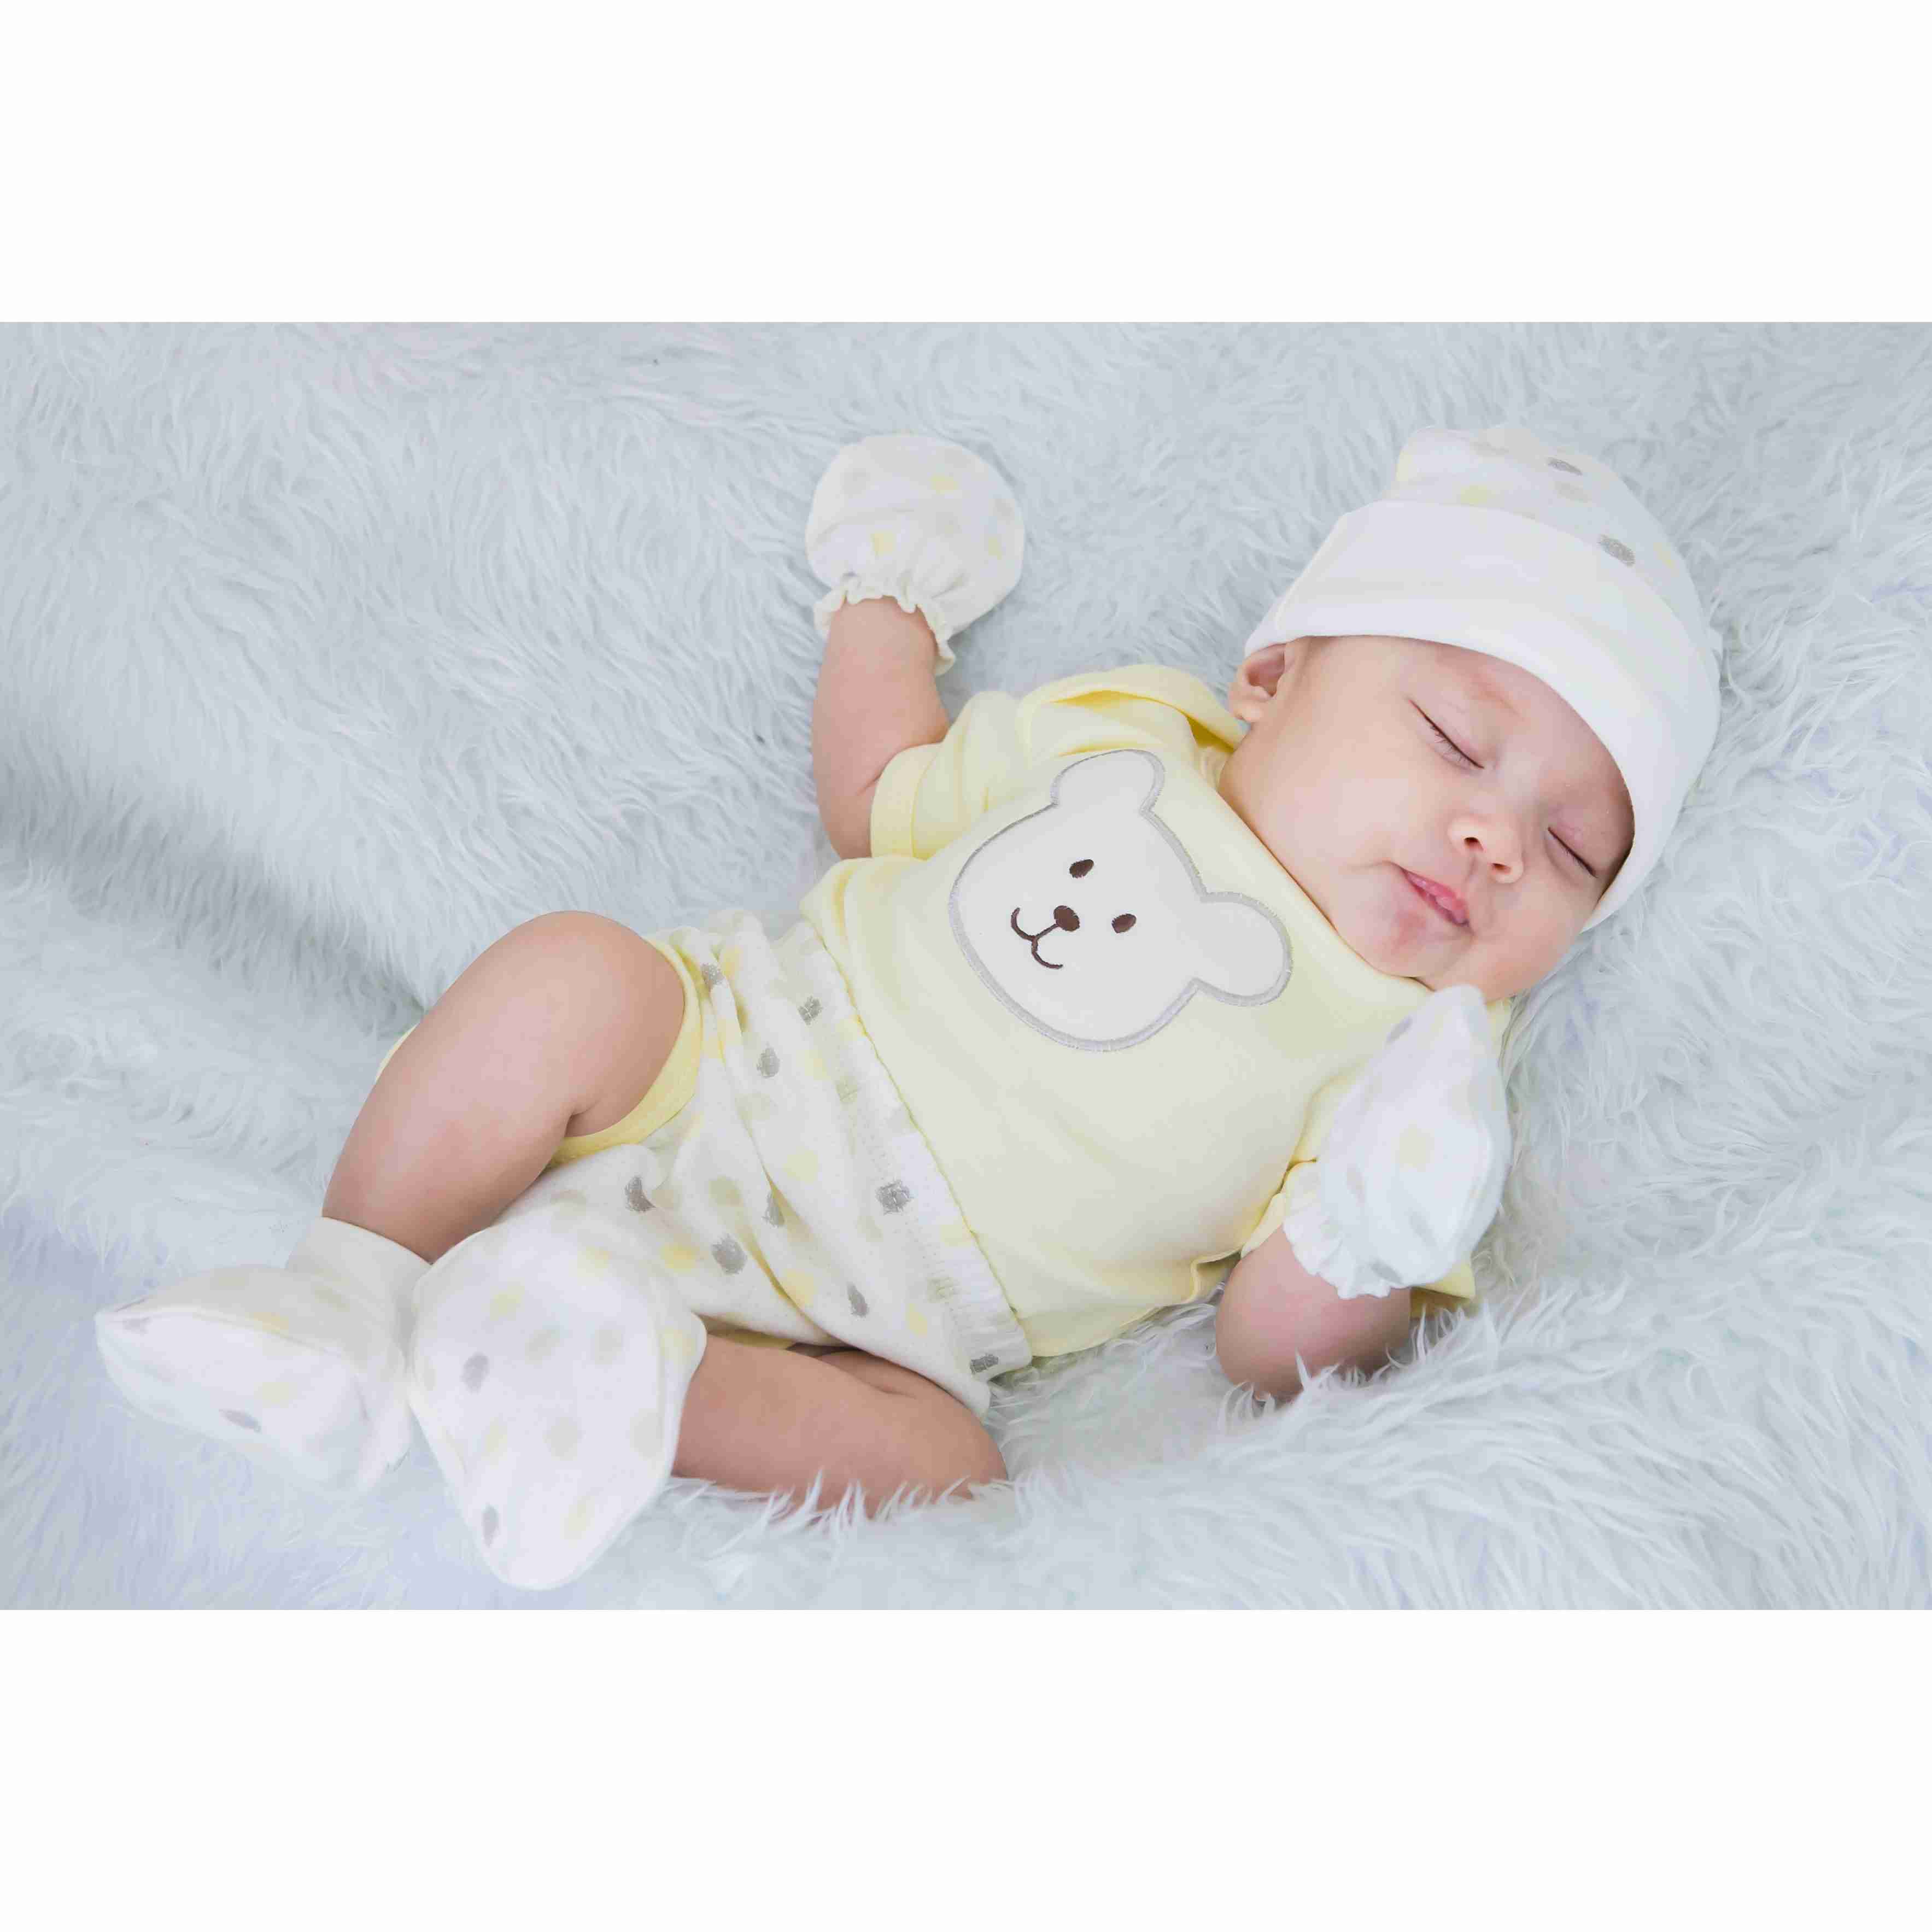 newbrn-baby-clothing-set with discount code